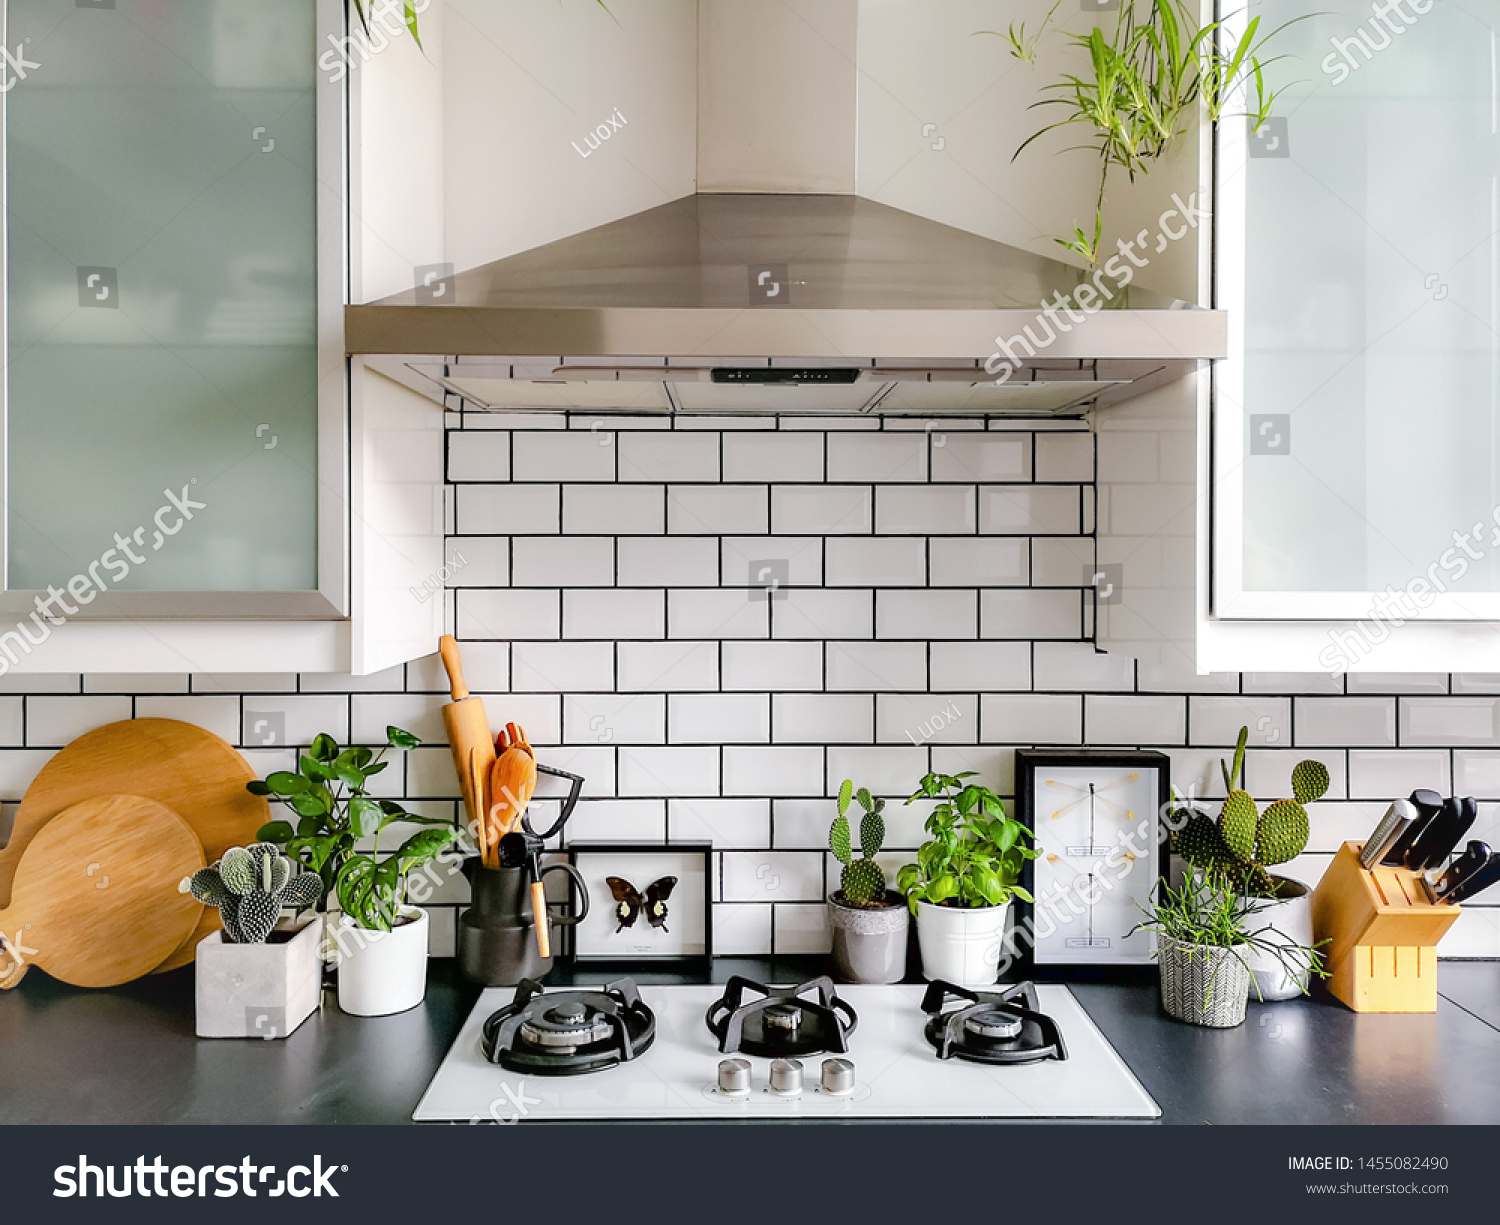 Black and white subway tiled kitchen with numerous plants and framed taxidermy insect art #1455082490